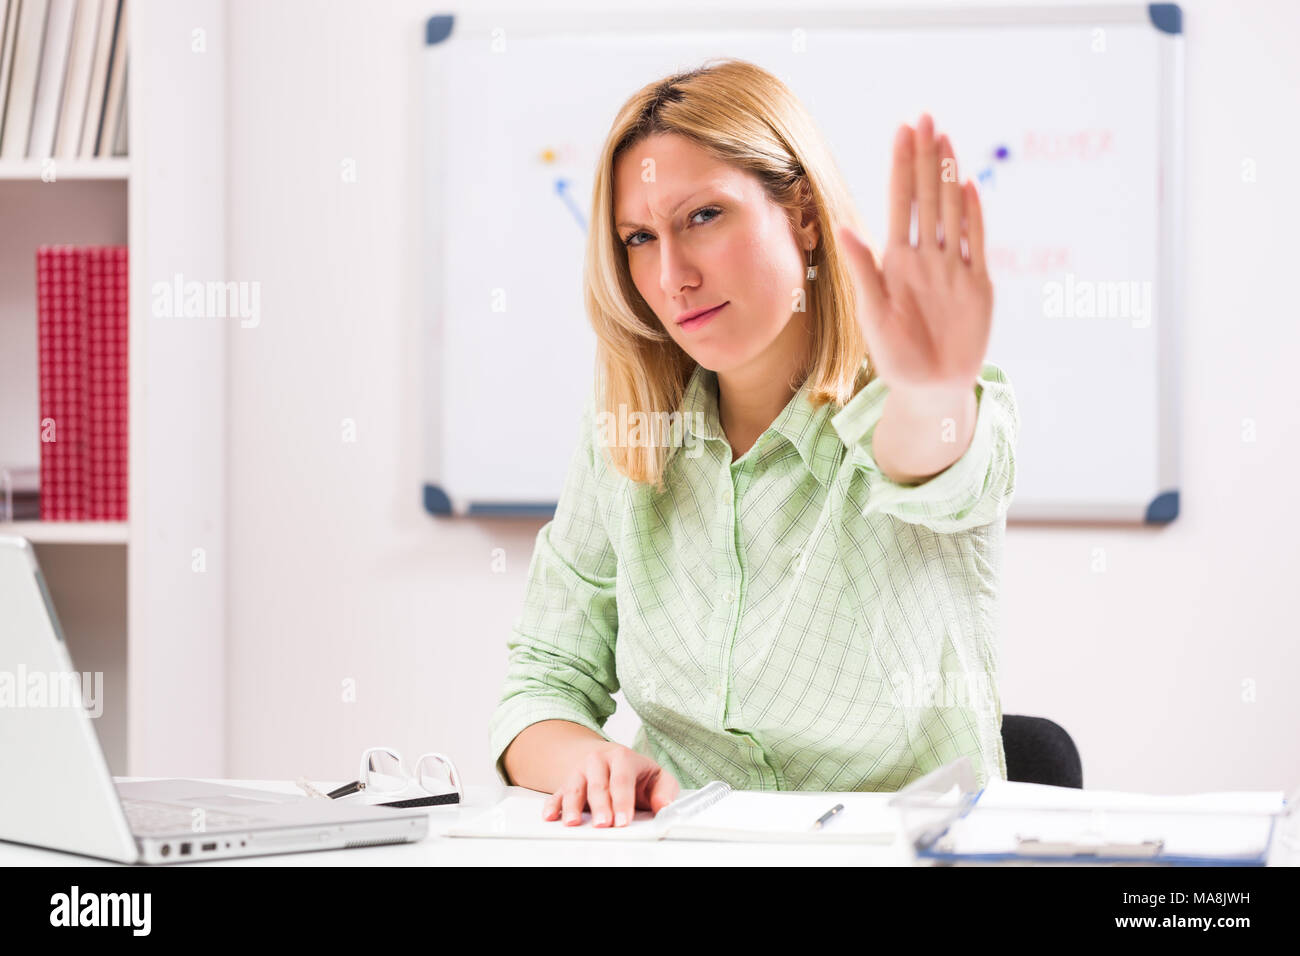 Stop harassment at work! Stock Photo